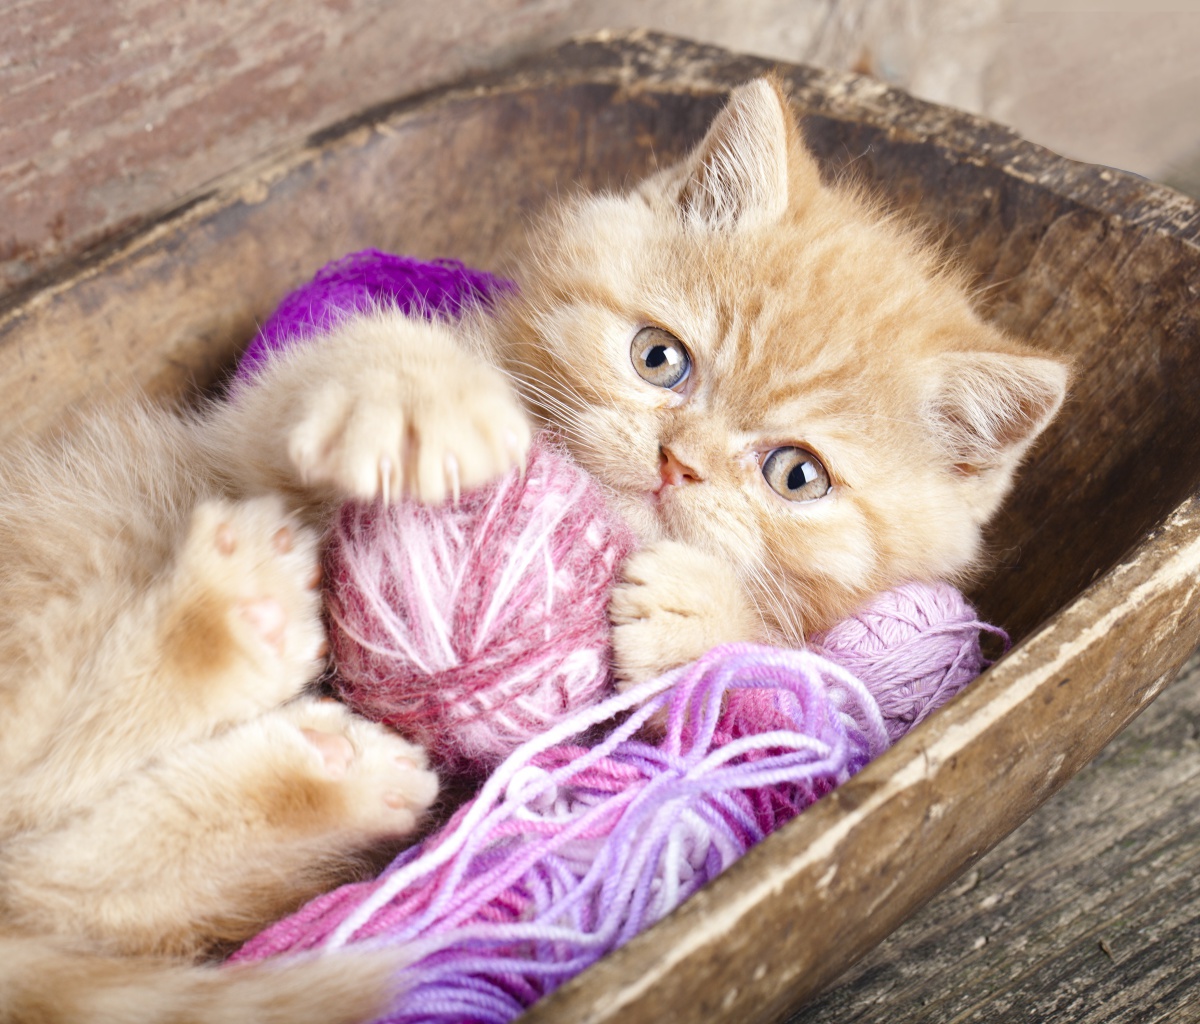 Cute Kitten Playing With A Ball Of Yarn wallpaper 1200x1024